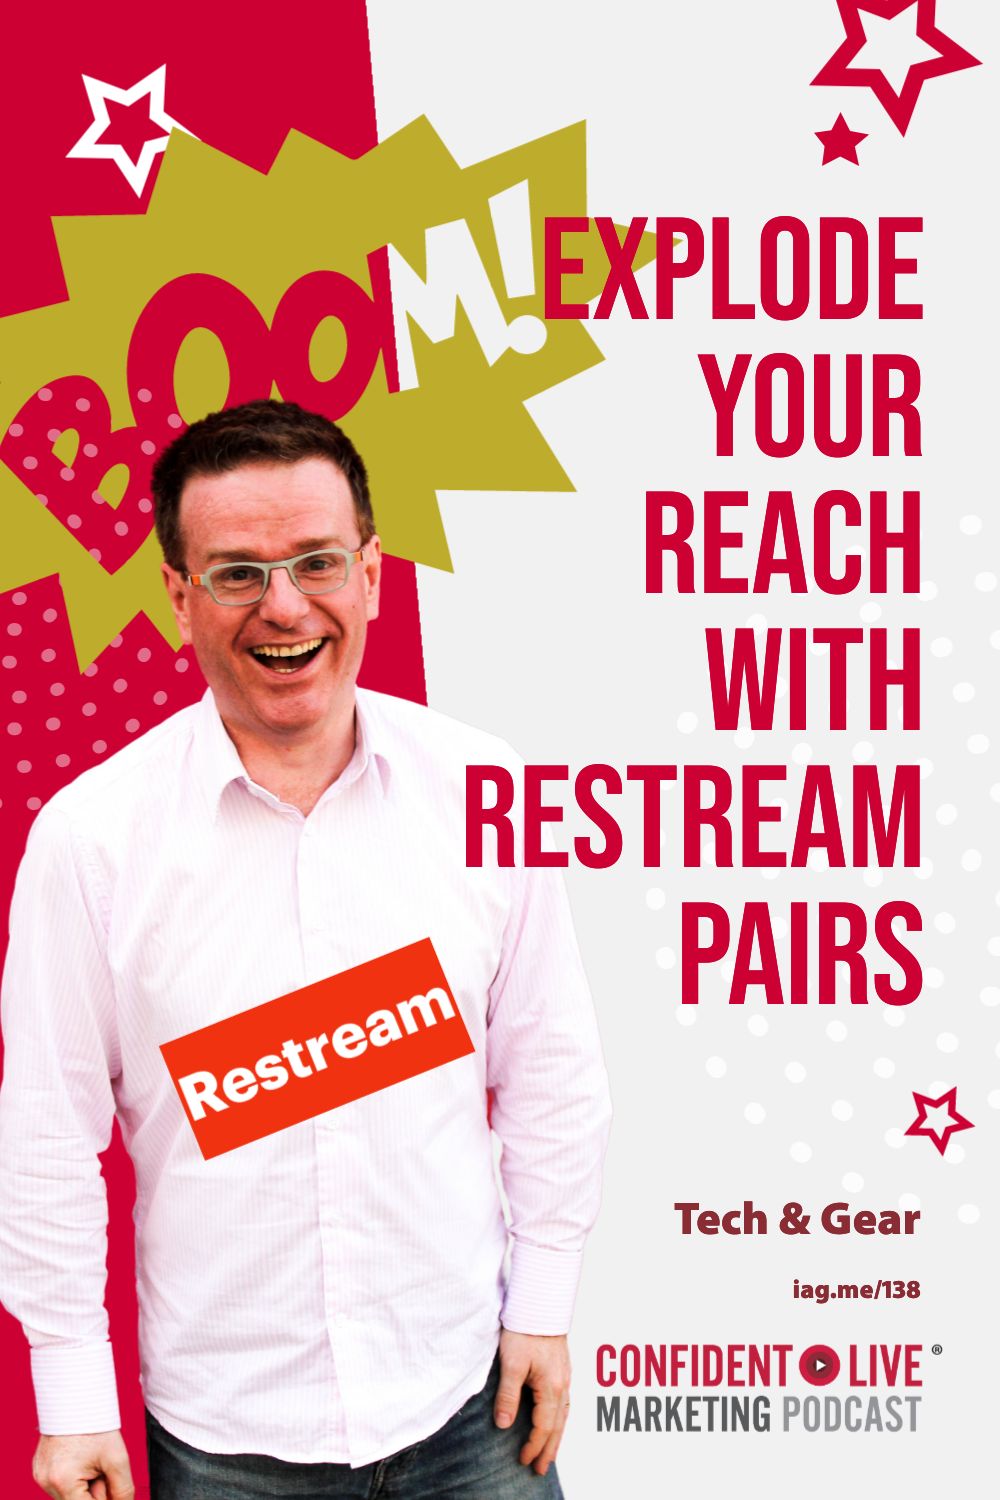 Explode Your Reach with Restream Pairs